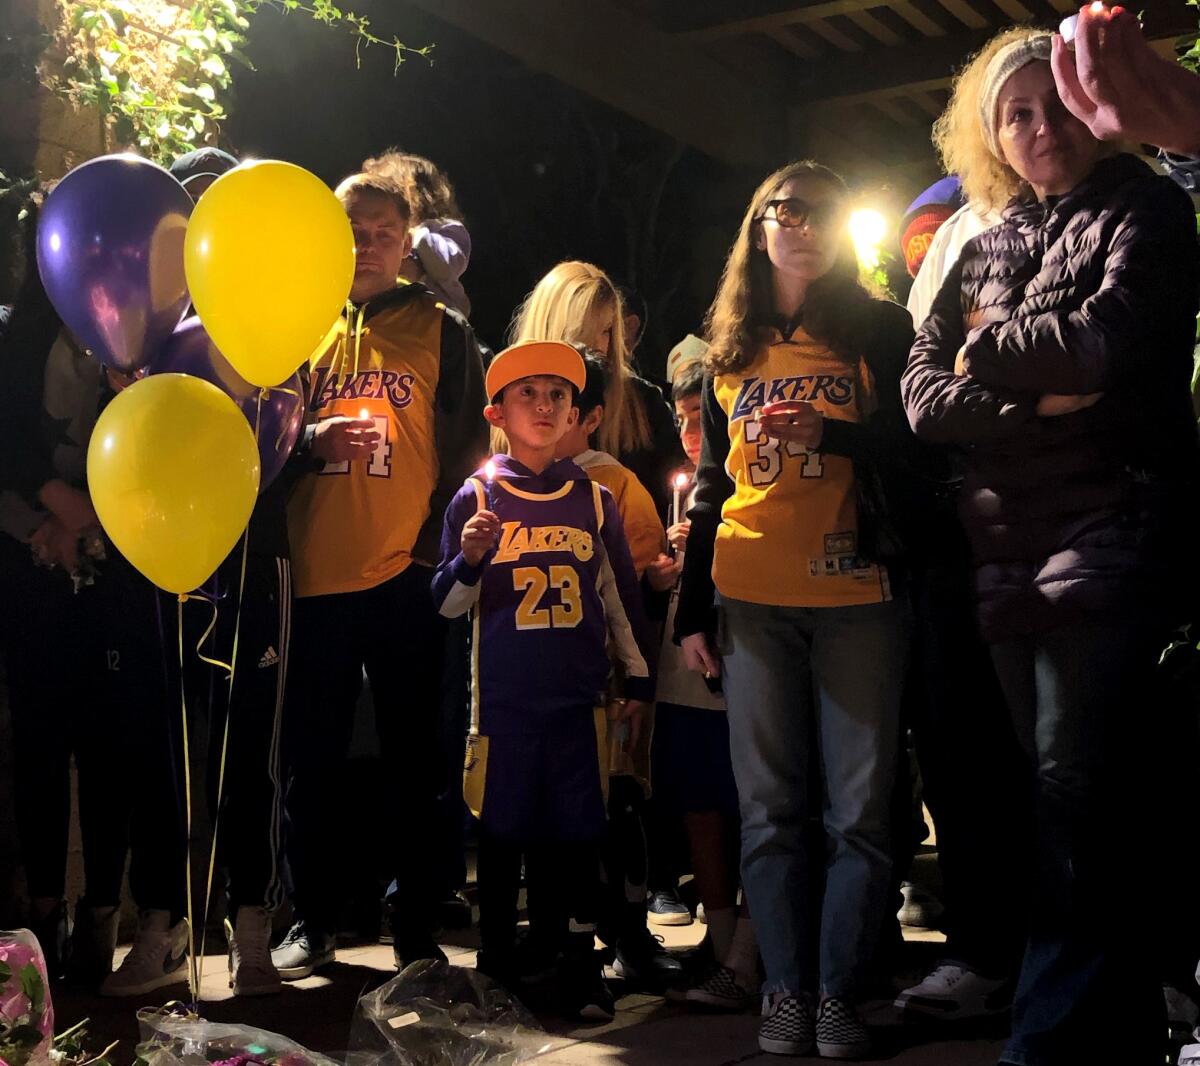 “We all know him as just Kobe, a person,” Newport Beach resident Jill Yank said at a candlelight vigil on Sunday.